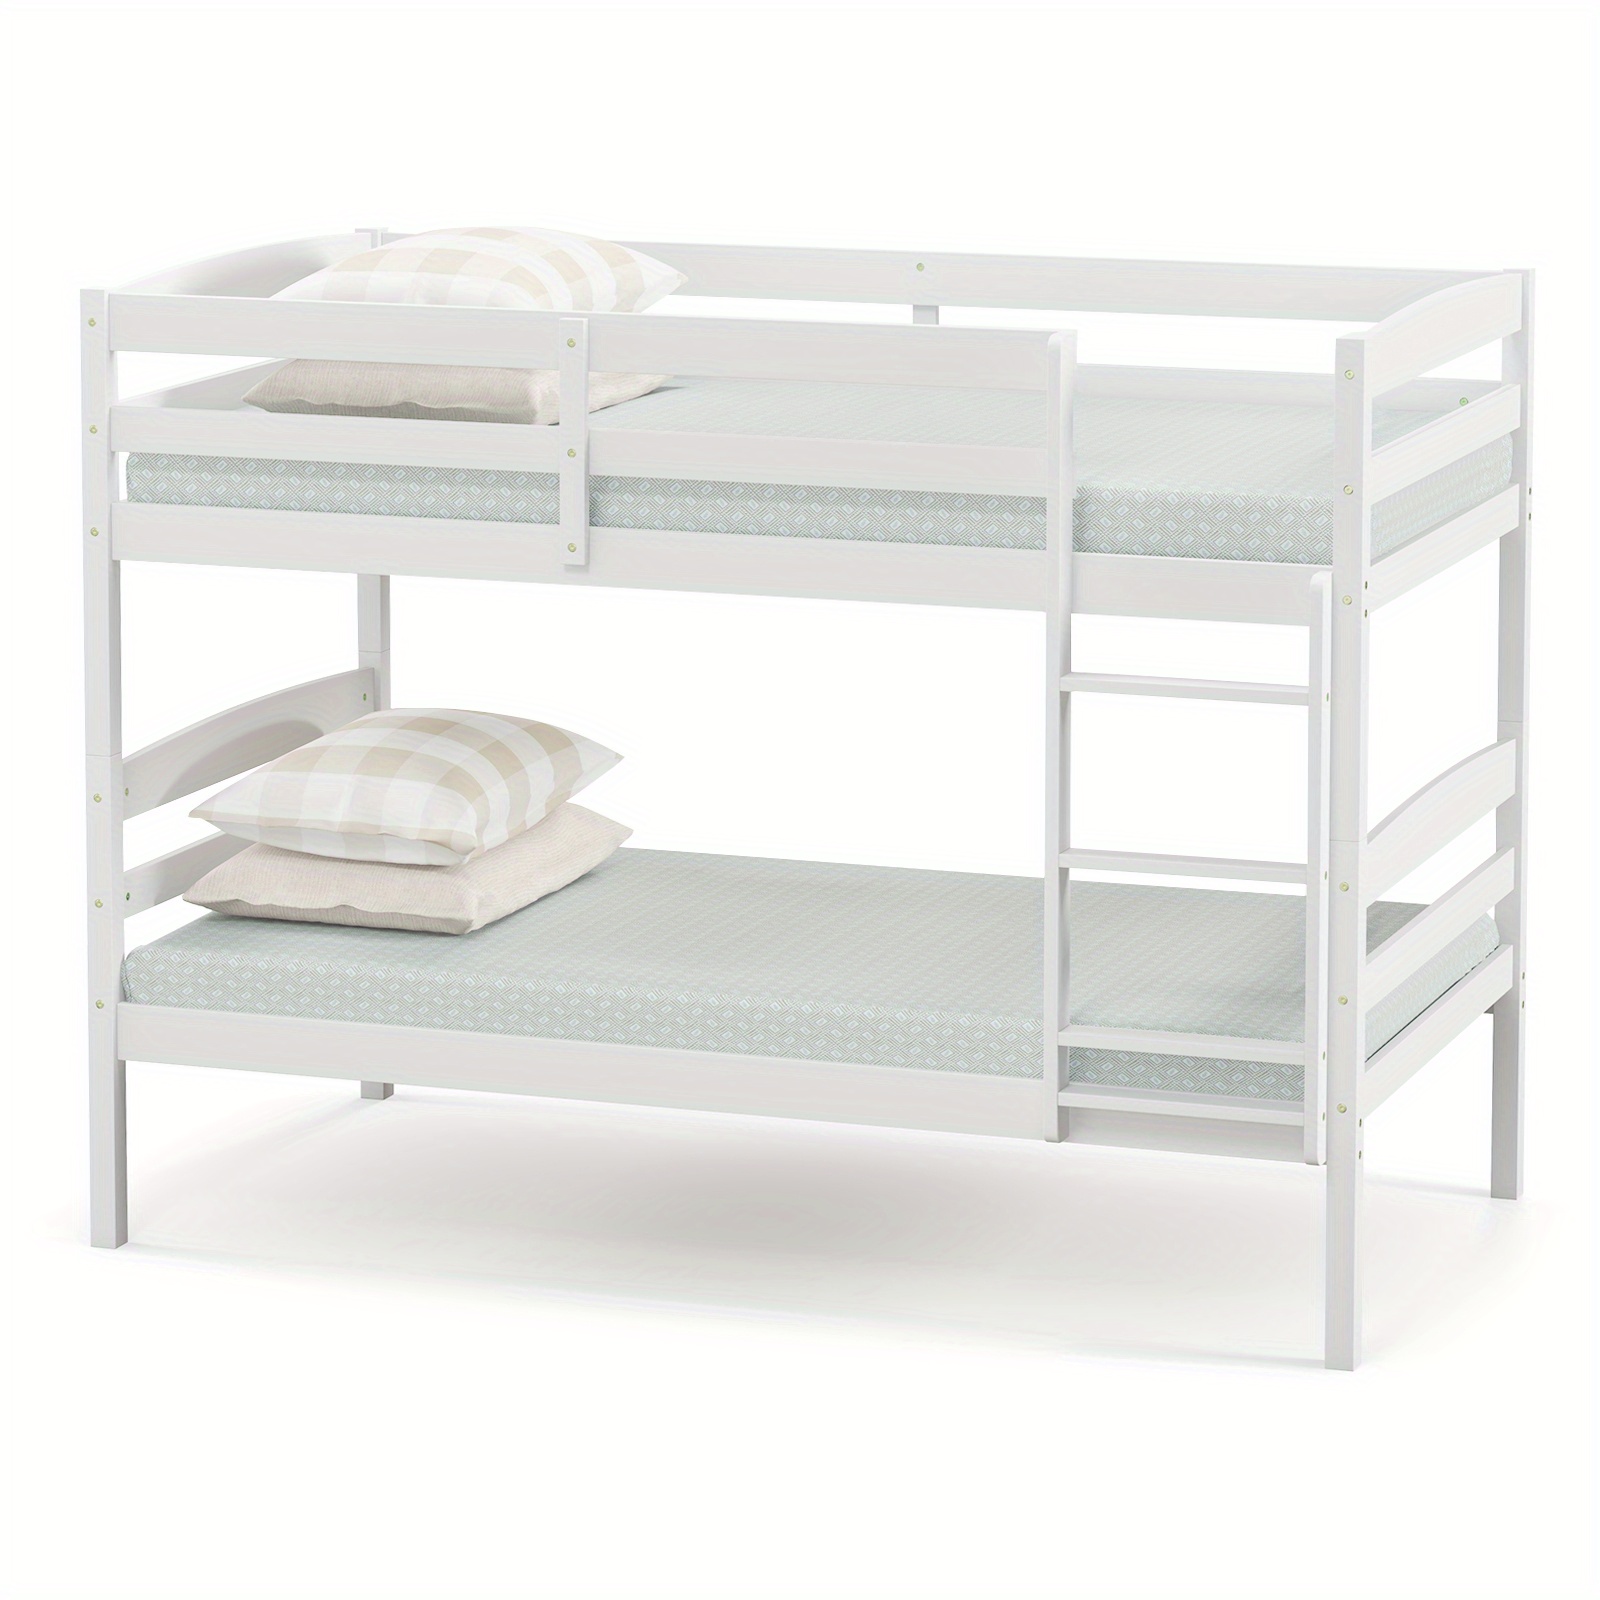 

Lifezeal Twin Over Twin Bunk Bed Wooden Convertible Into 2 Beds High Guardrails White